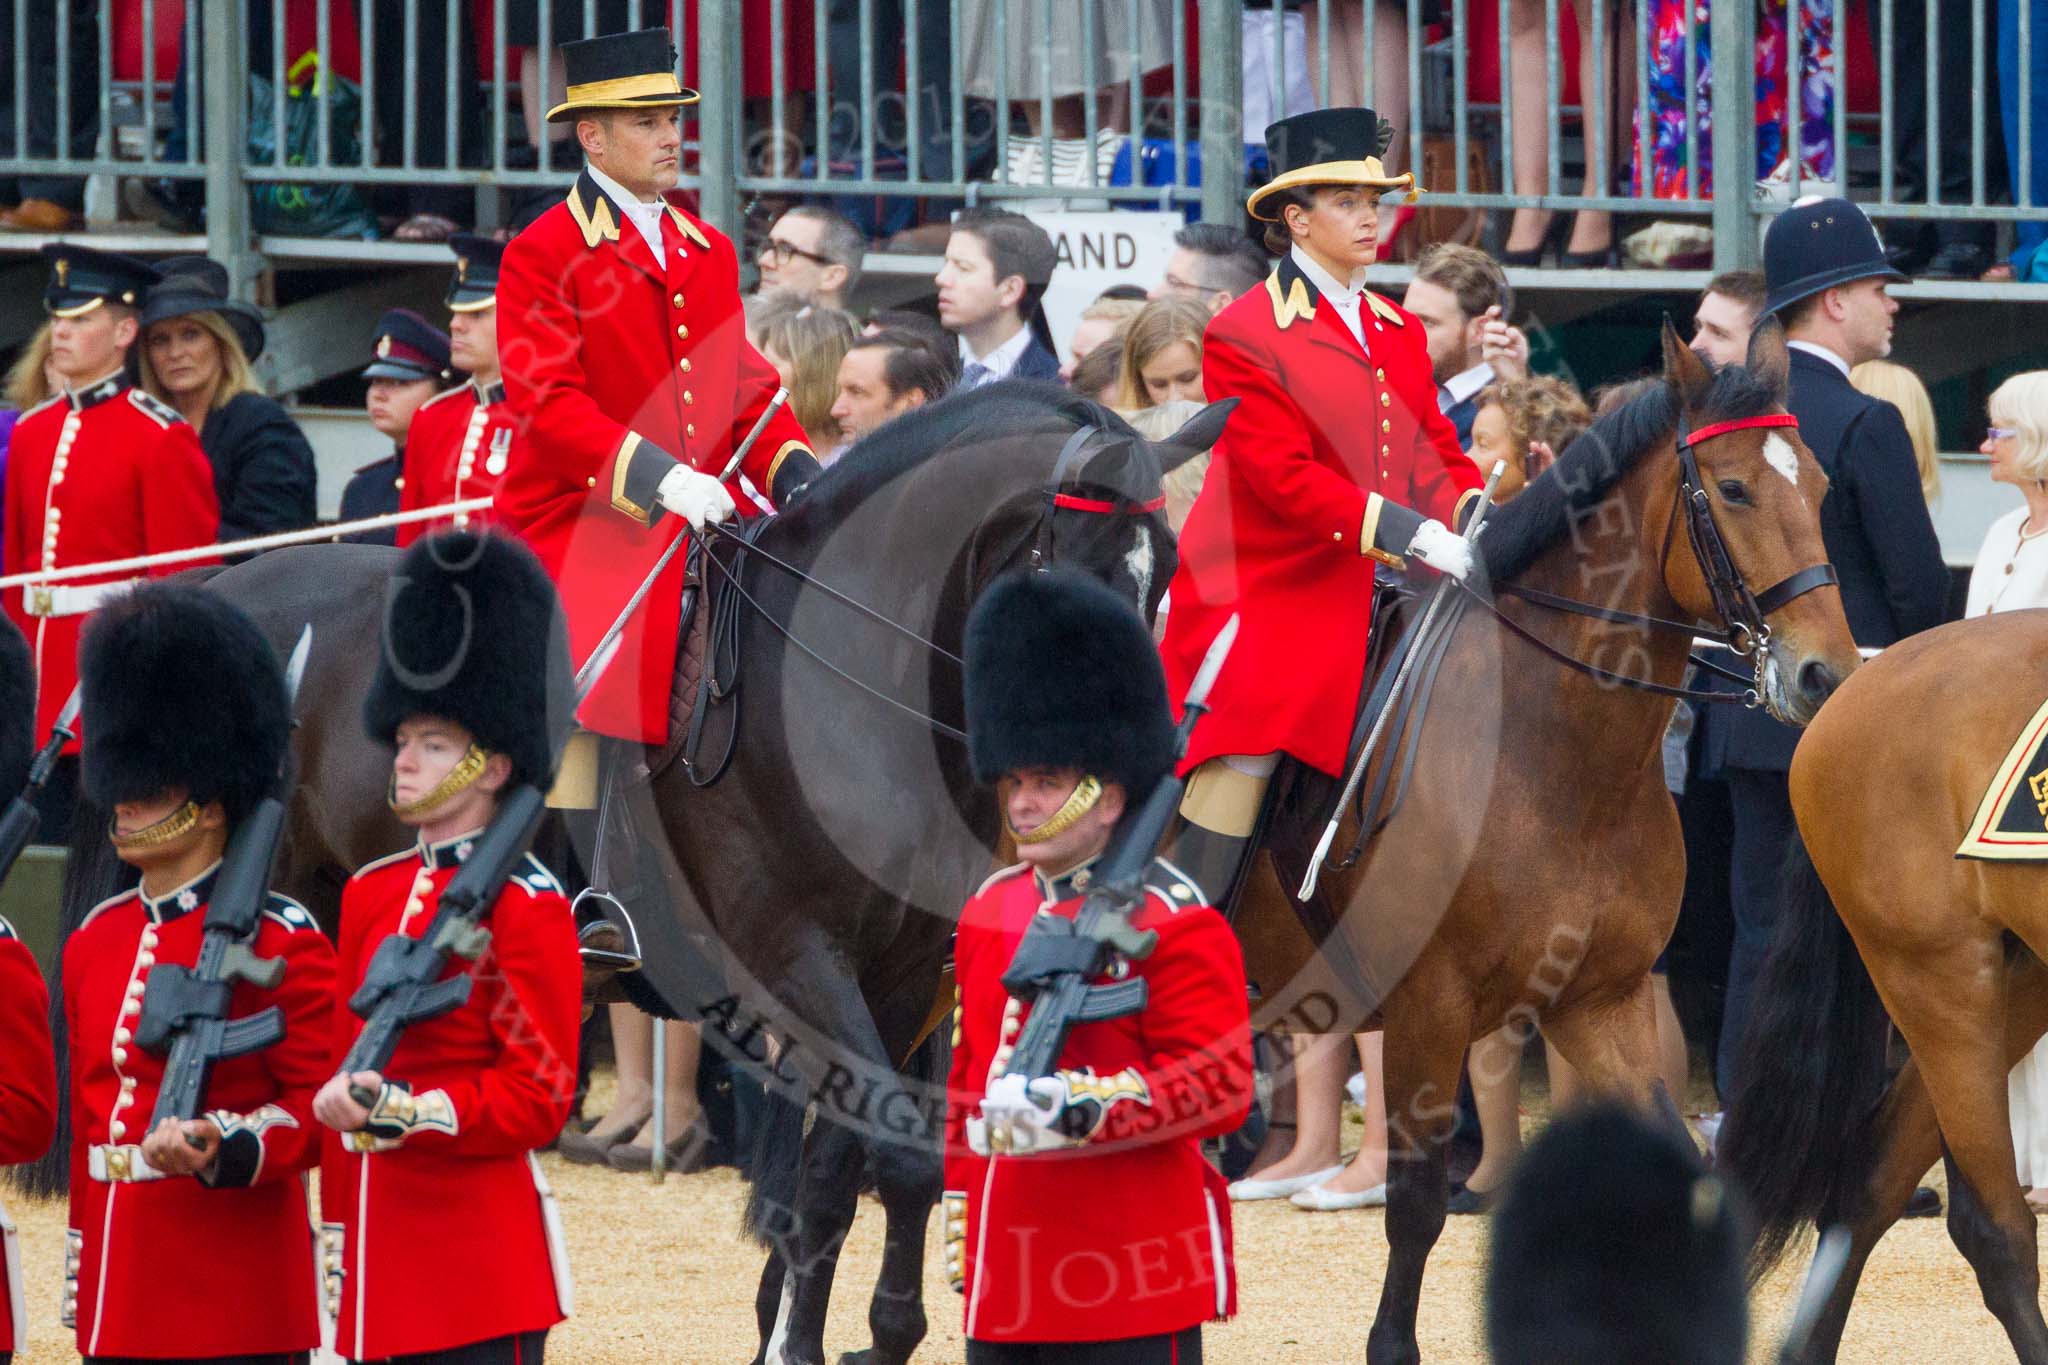 Trooping the Colour 2015. Image #244, 13 June 2015 10:59 Horse Guards Parade, London, UK